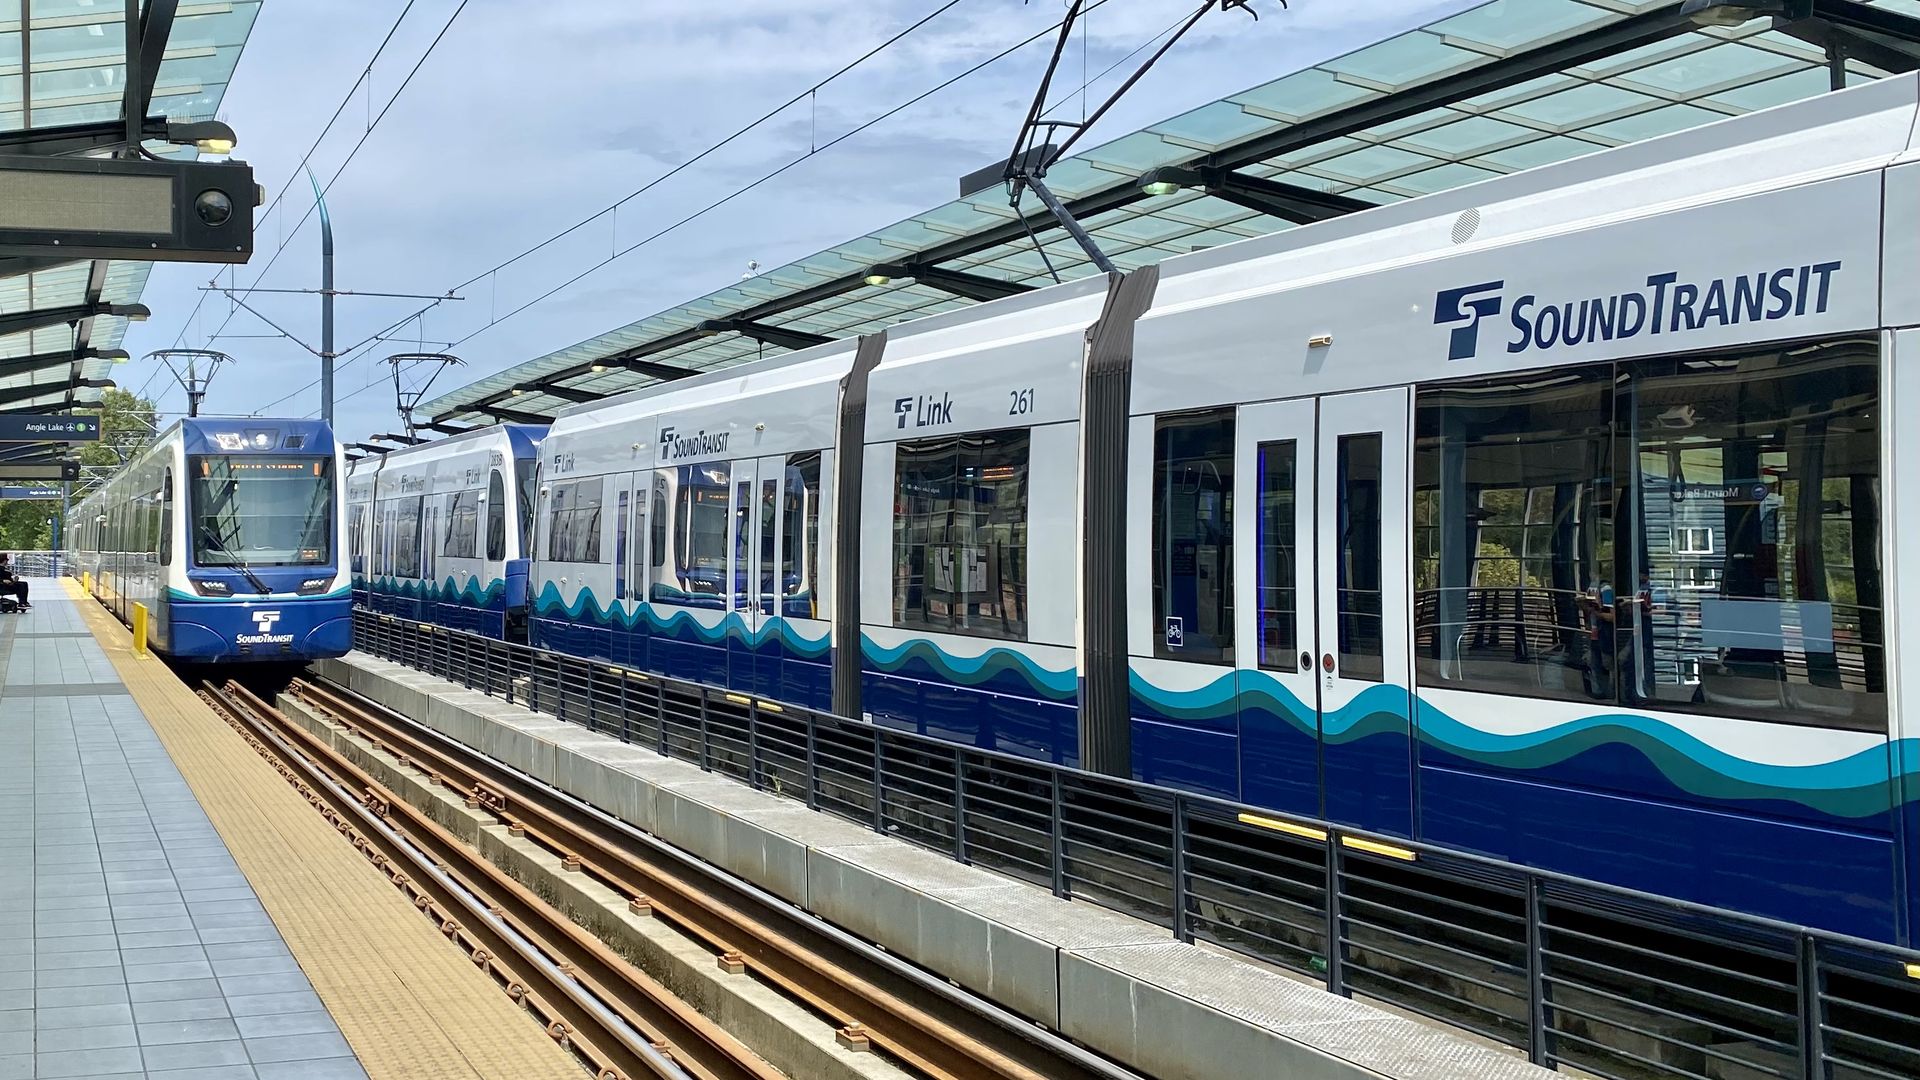 Two Sound Transit trains pass by one another at a train platform.